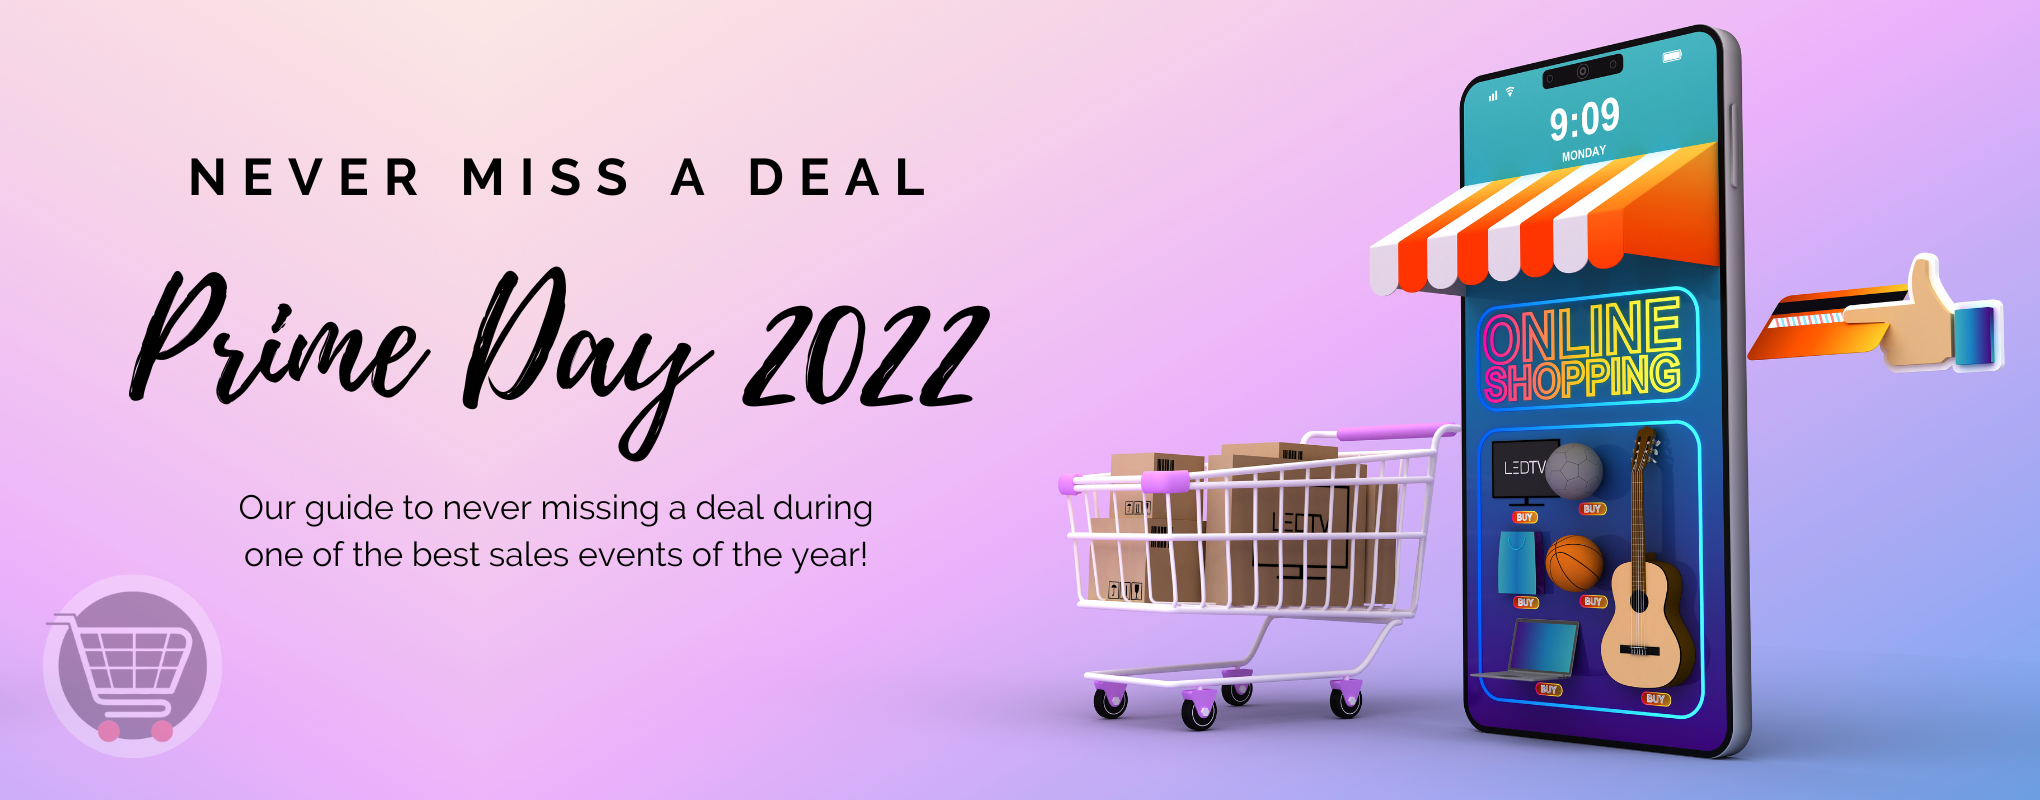 Never Miss a Deal During Prime Day 2022